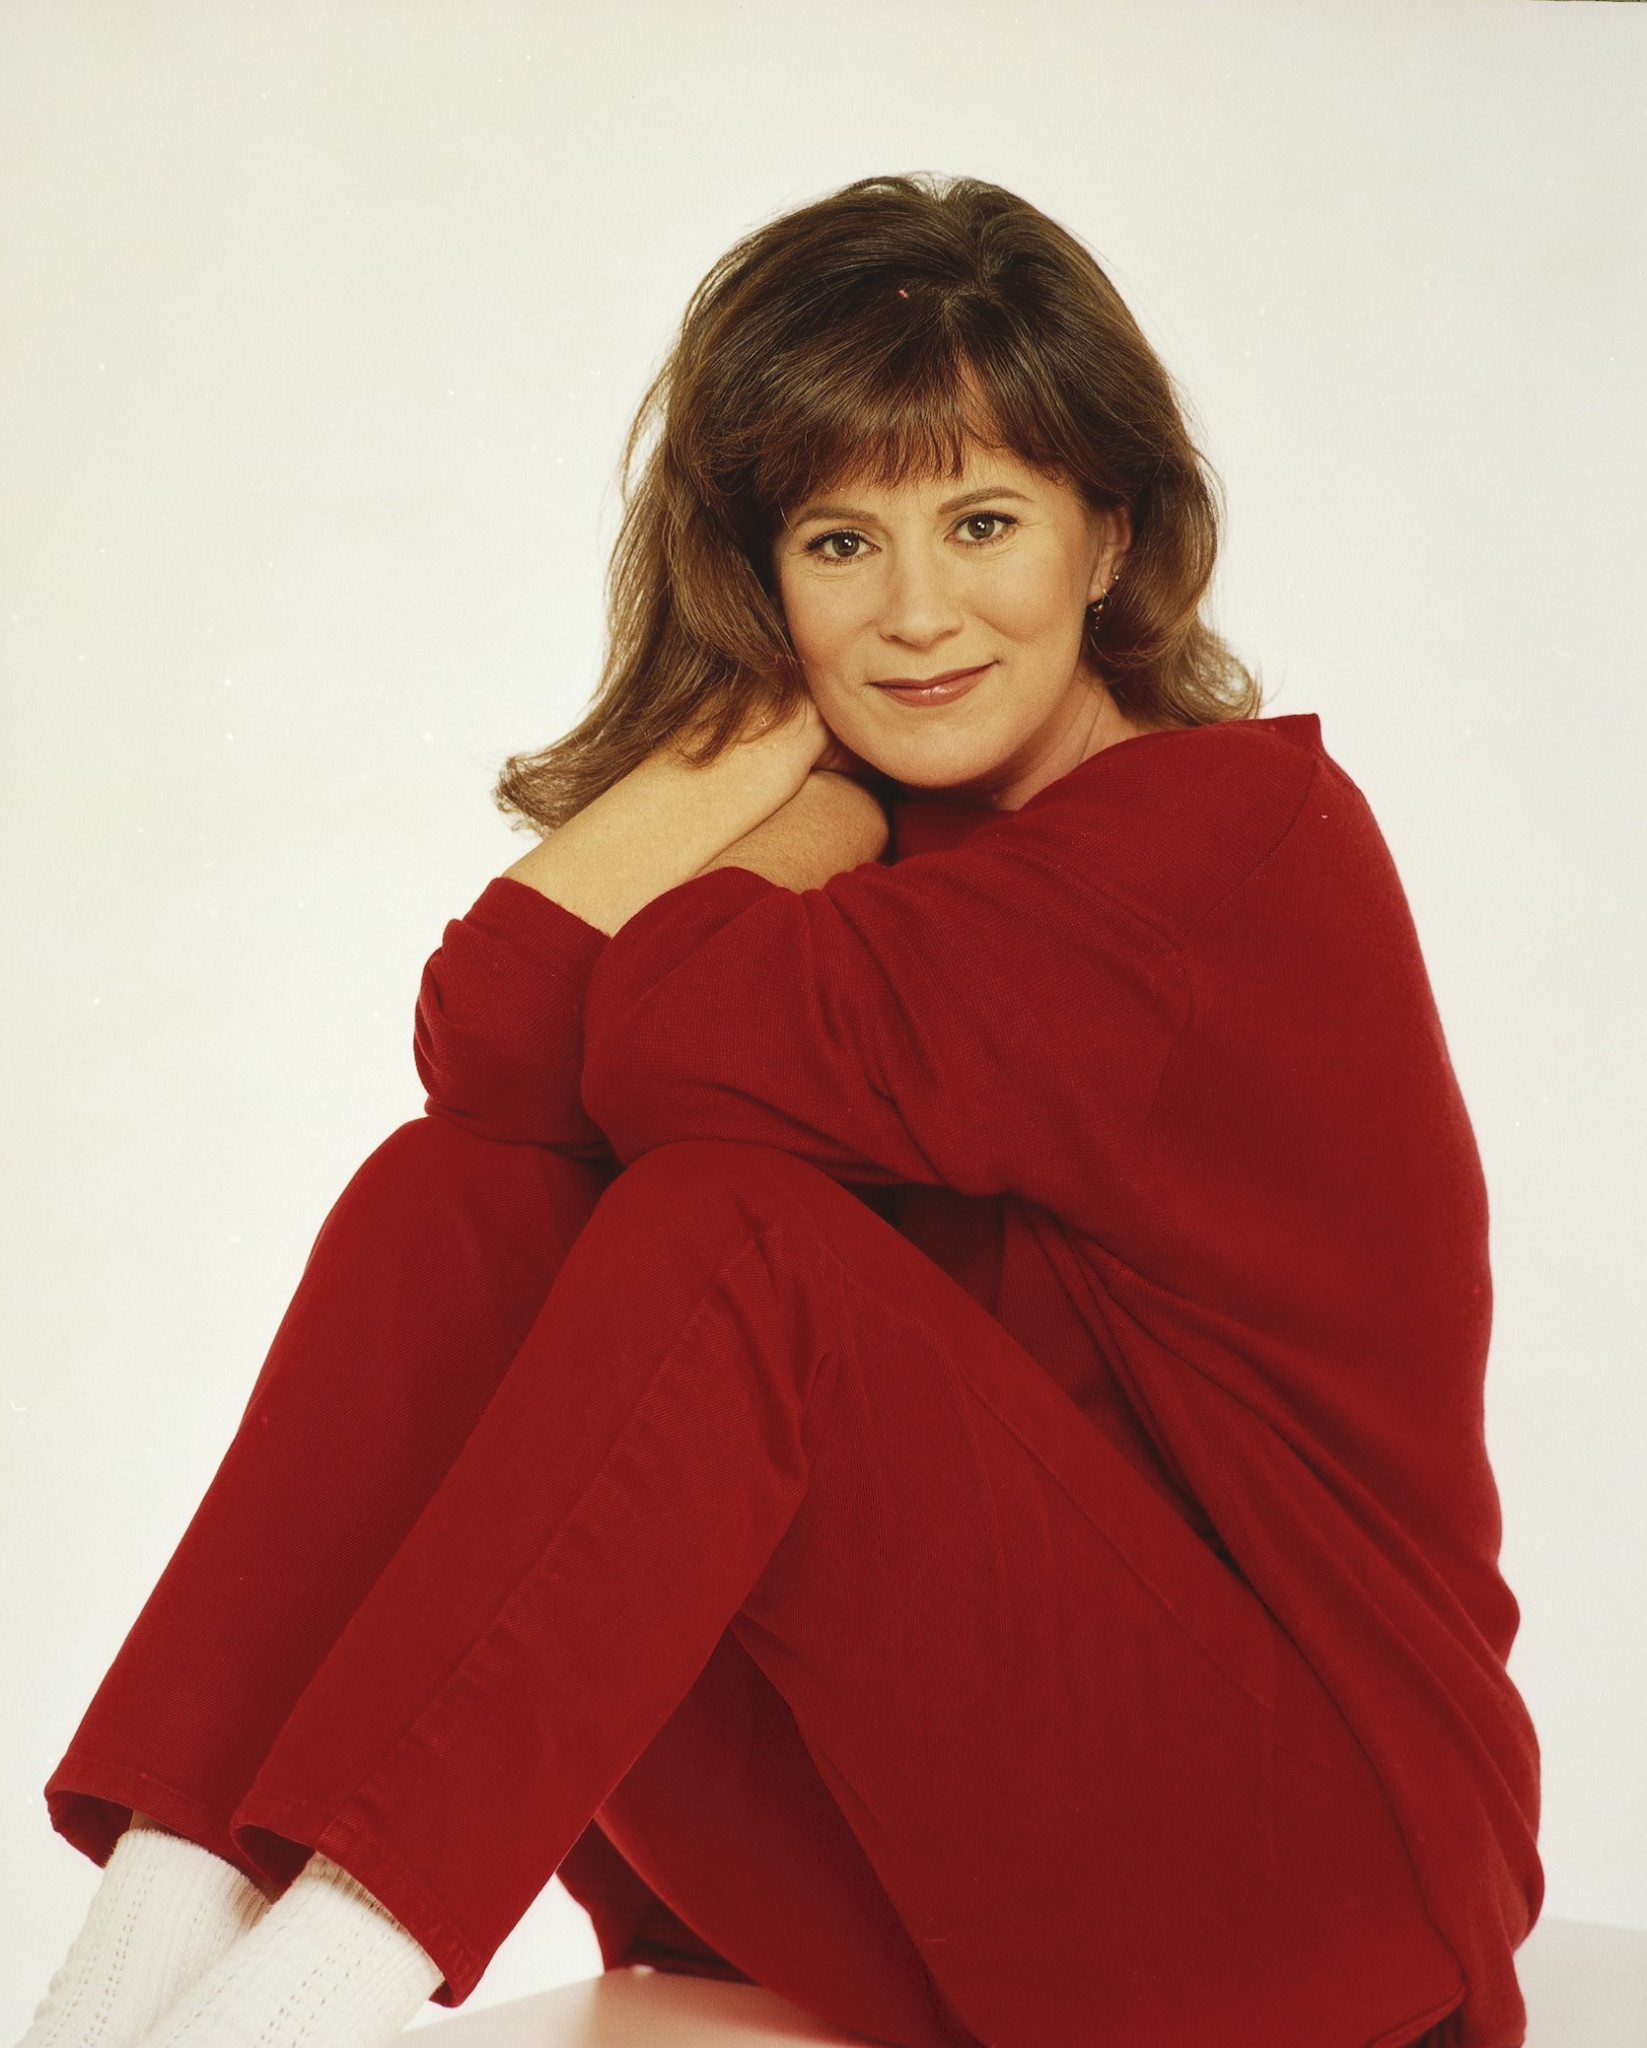 clint corley recommends patricia richardson hot pics pic